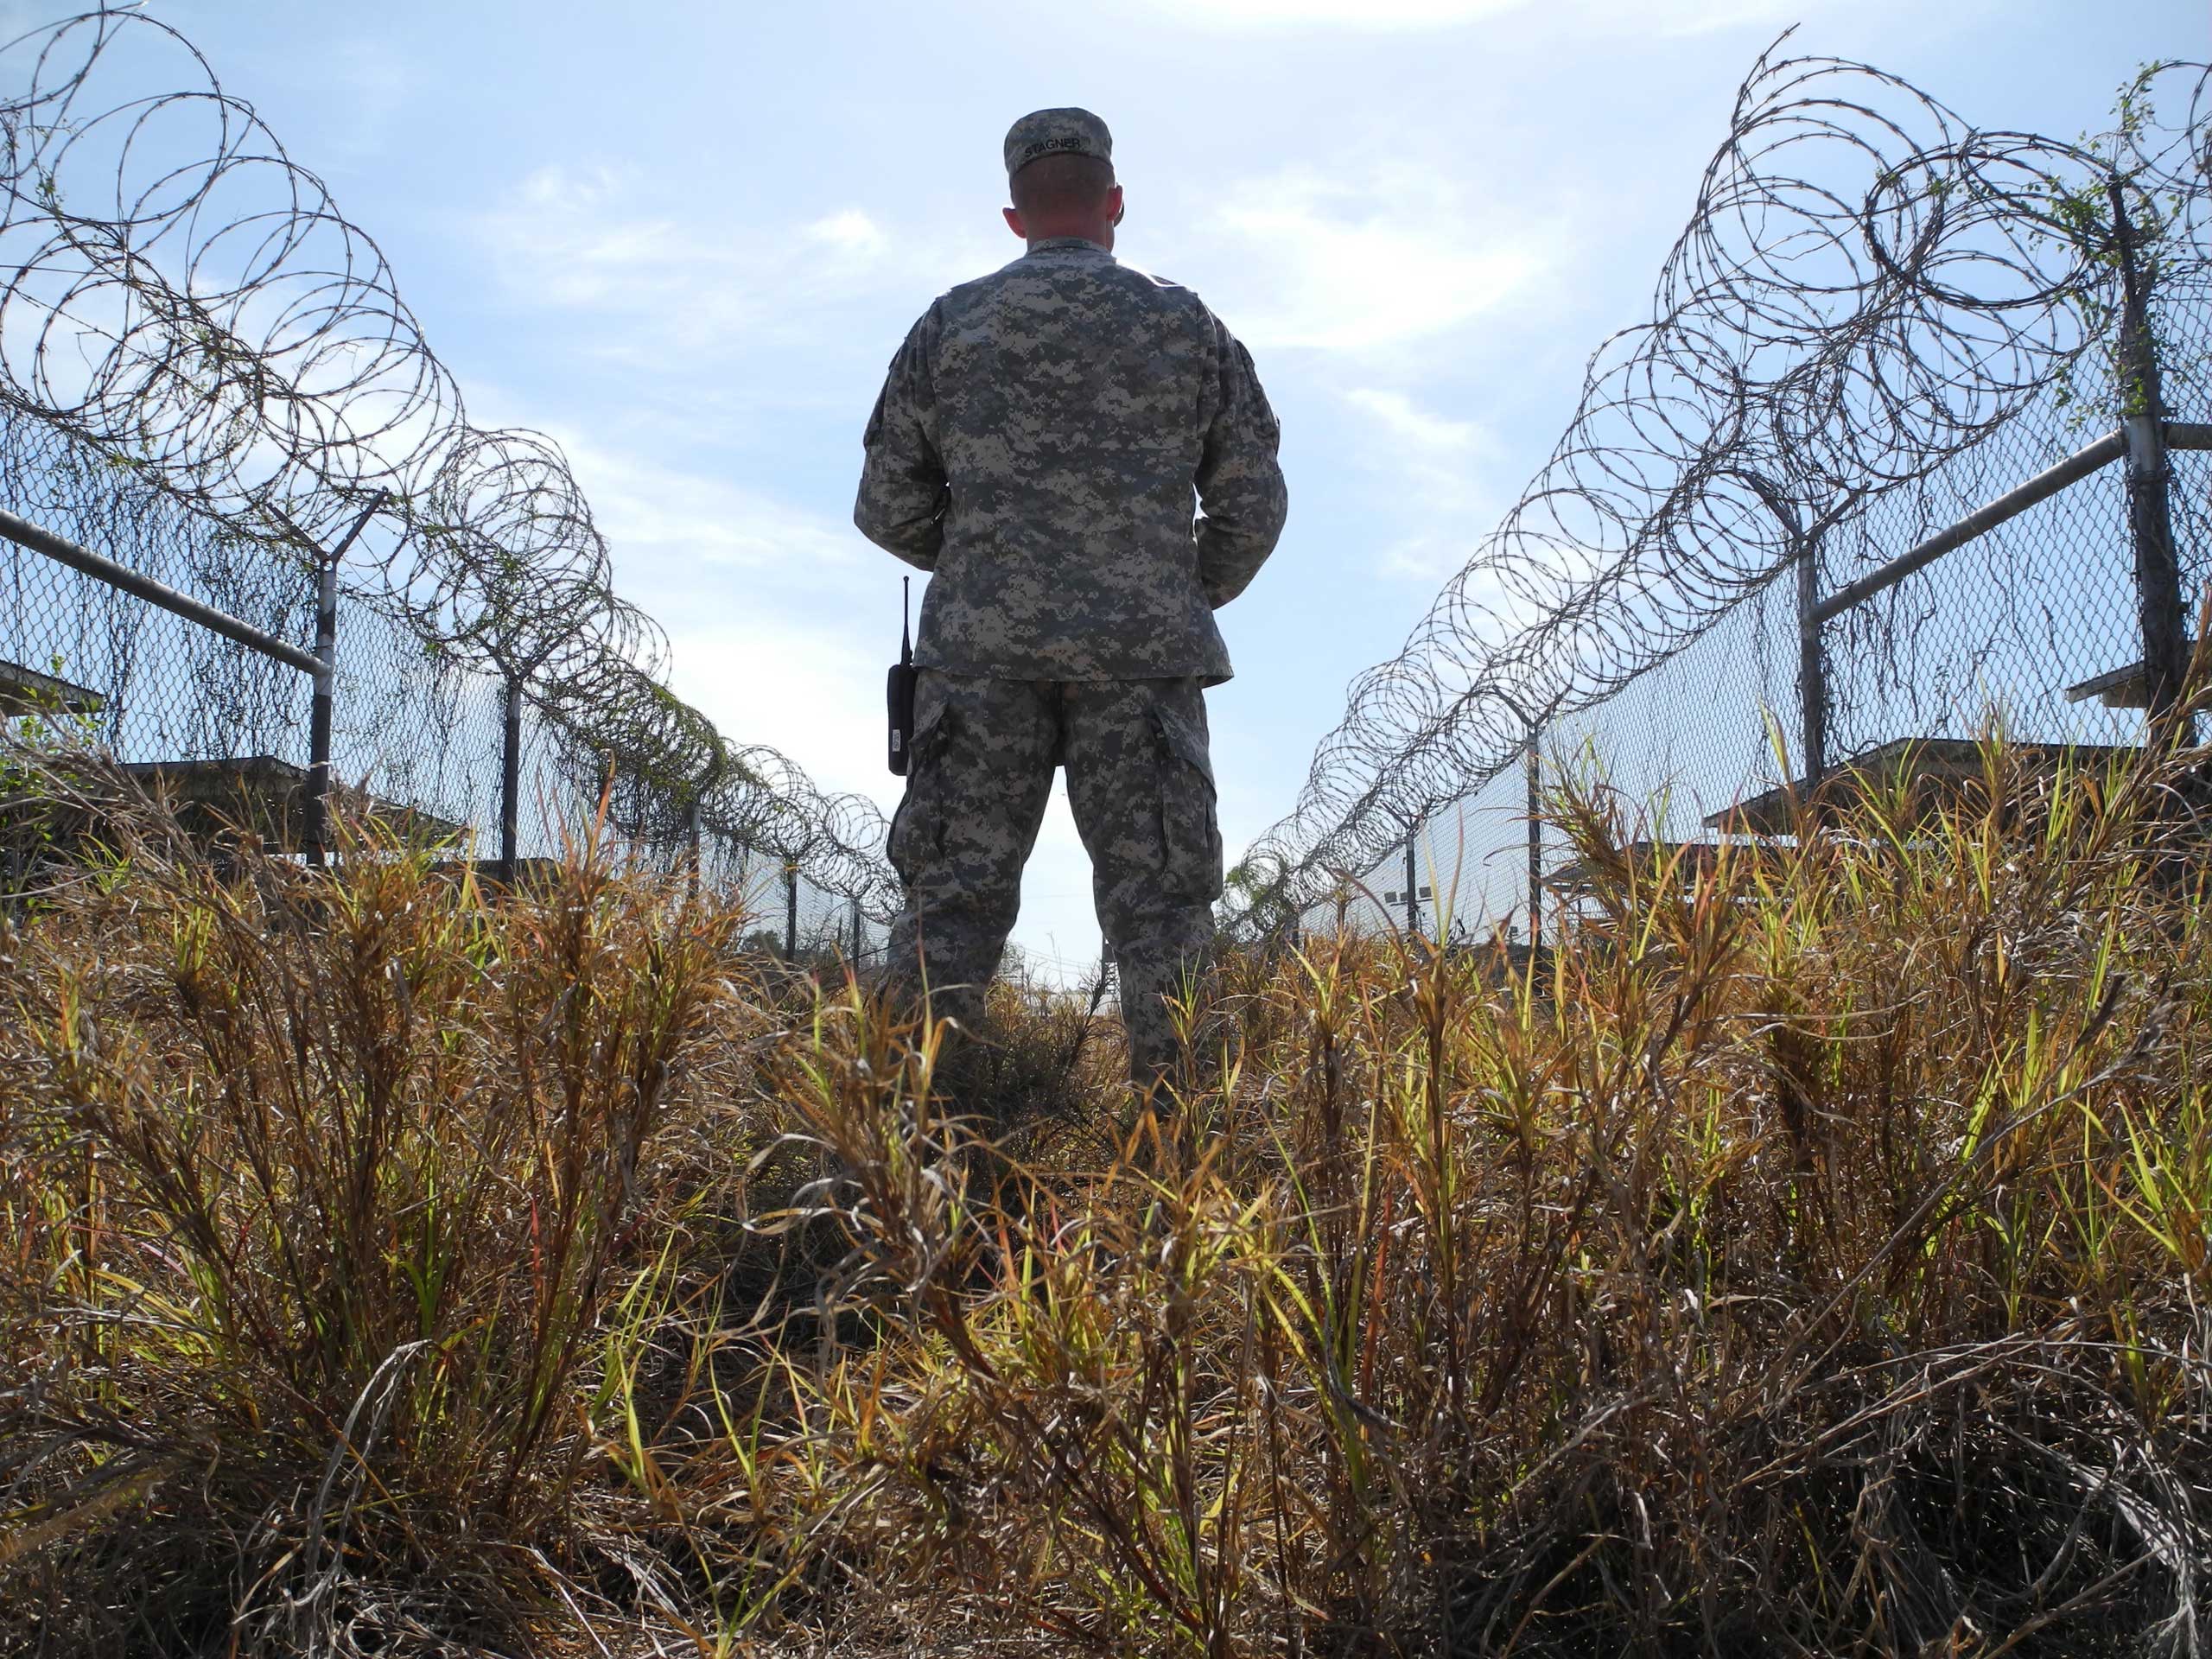 A U.S. military guard on the grounds of the now closed Camp X-Ray in Guantanamo Bay, Cuba, Aug. 22 2013. (Johannes Schmitt-Tegge—EPA)